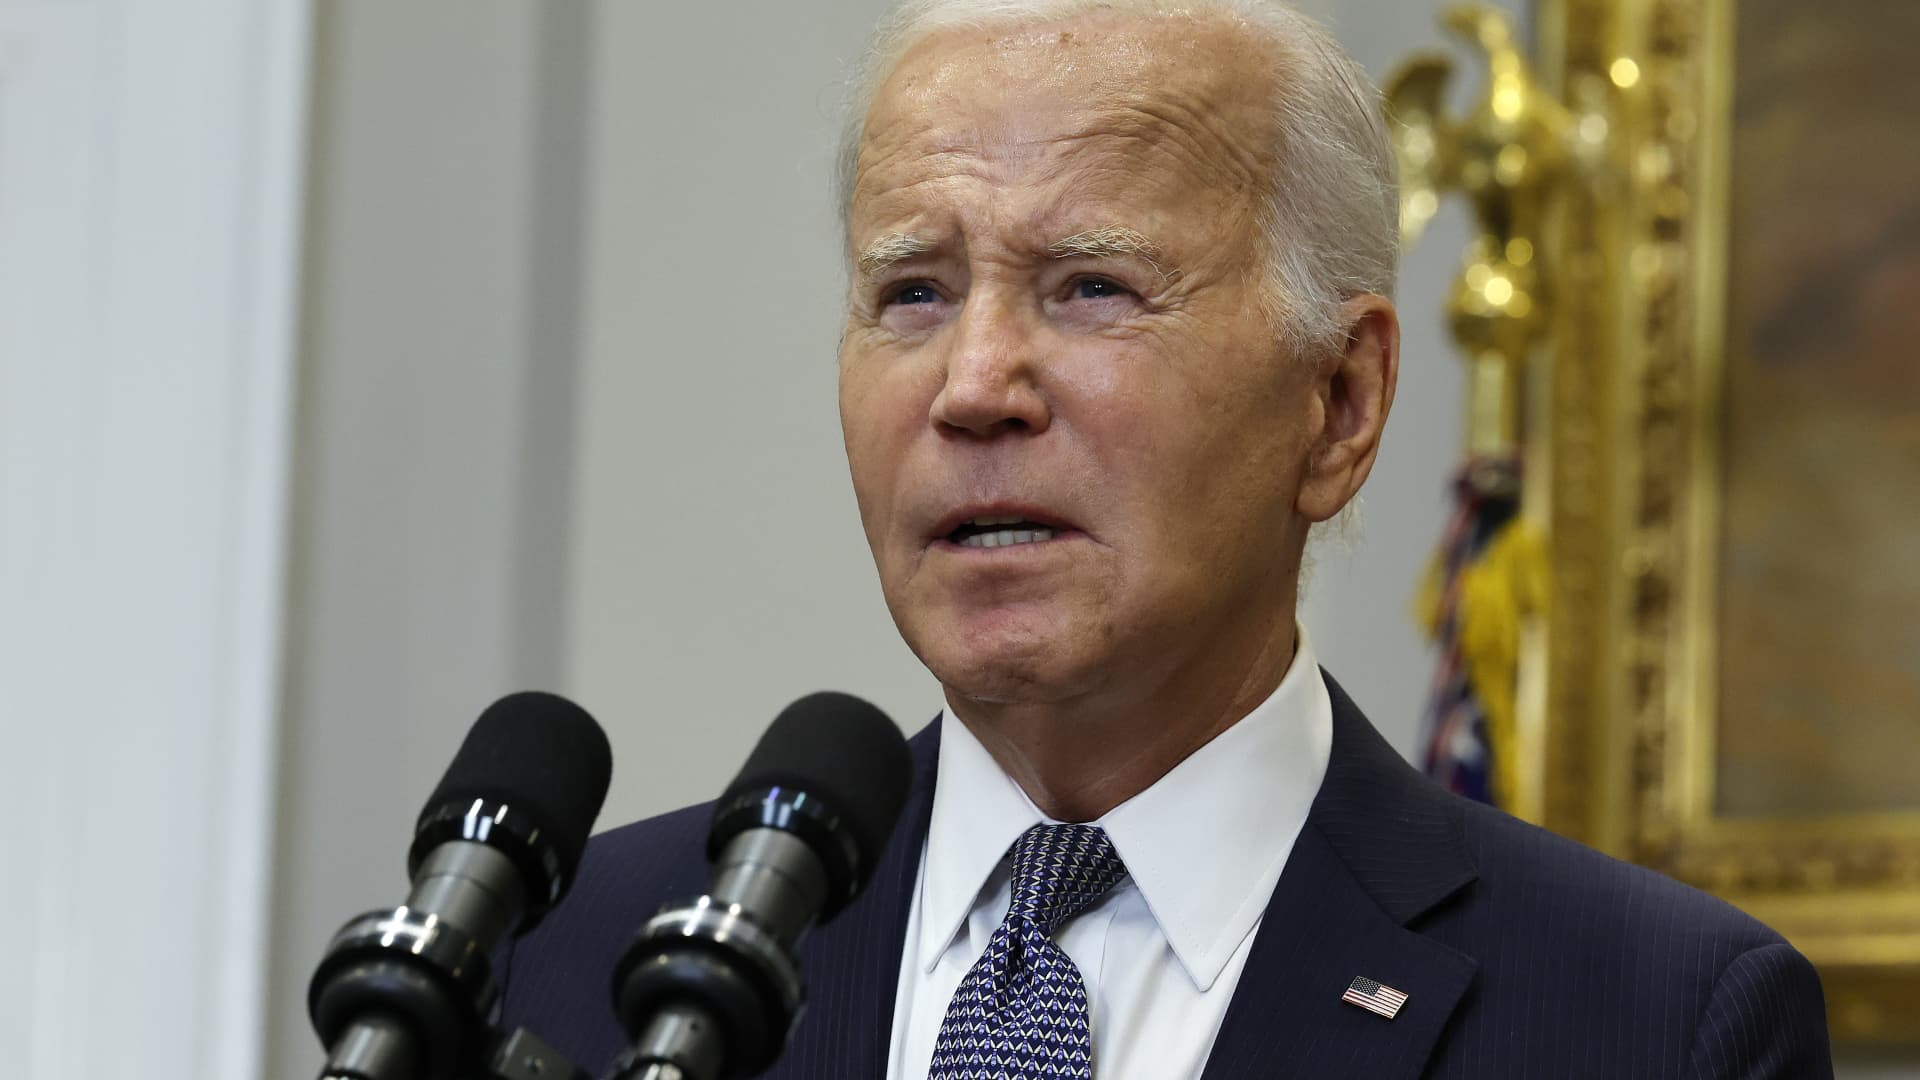 Biden administration forgives $39 billion in student debt for more than 800,000 borrowers